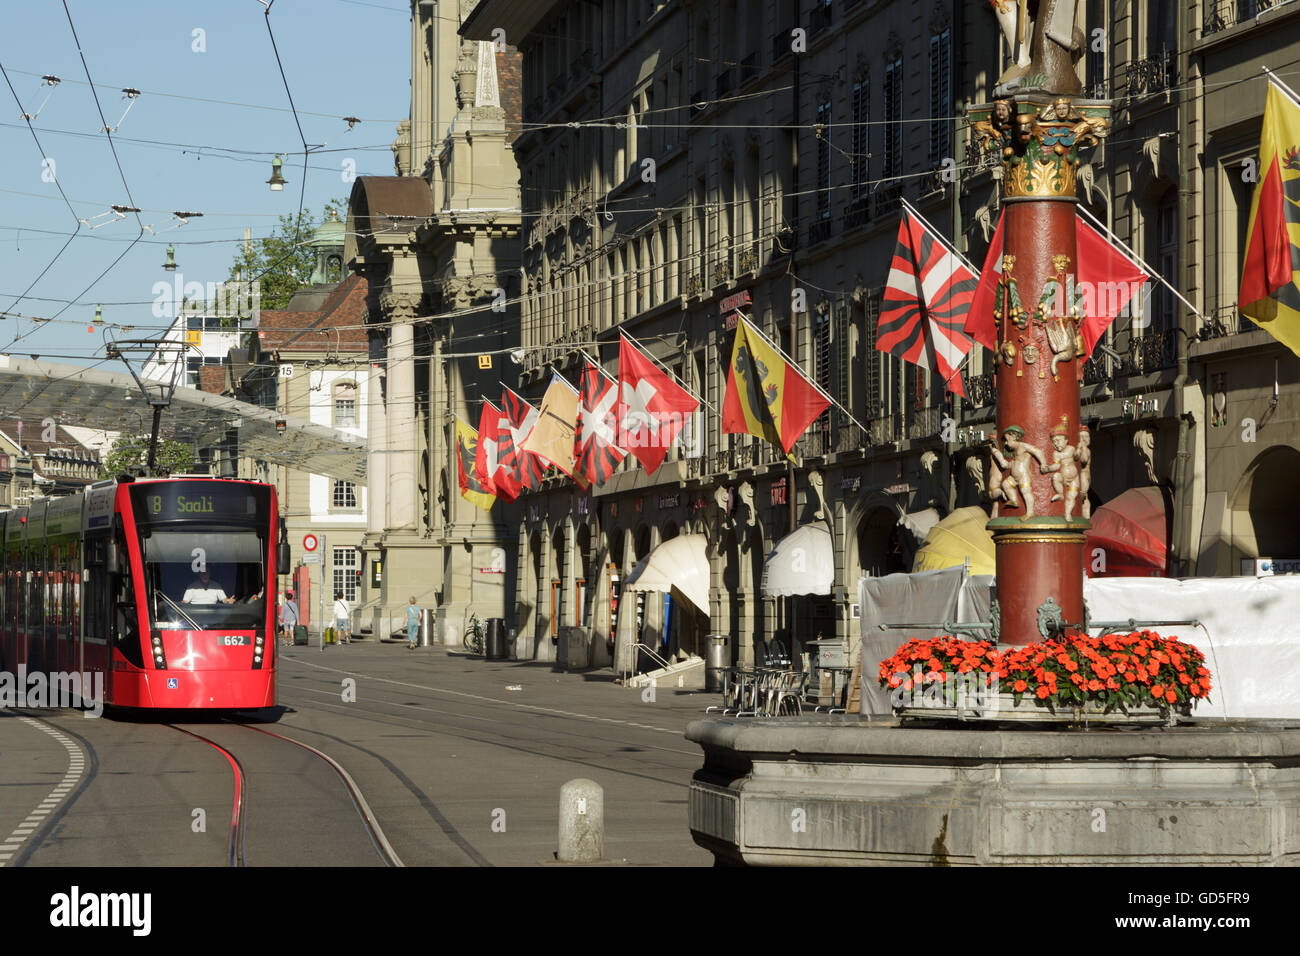 A photograph of a red tram near the main train station in Bern, Switzerland. Stock Photo